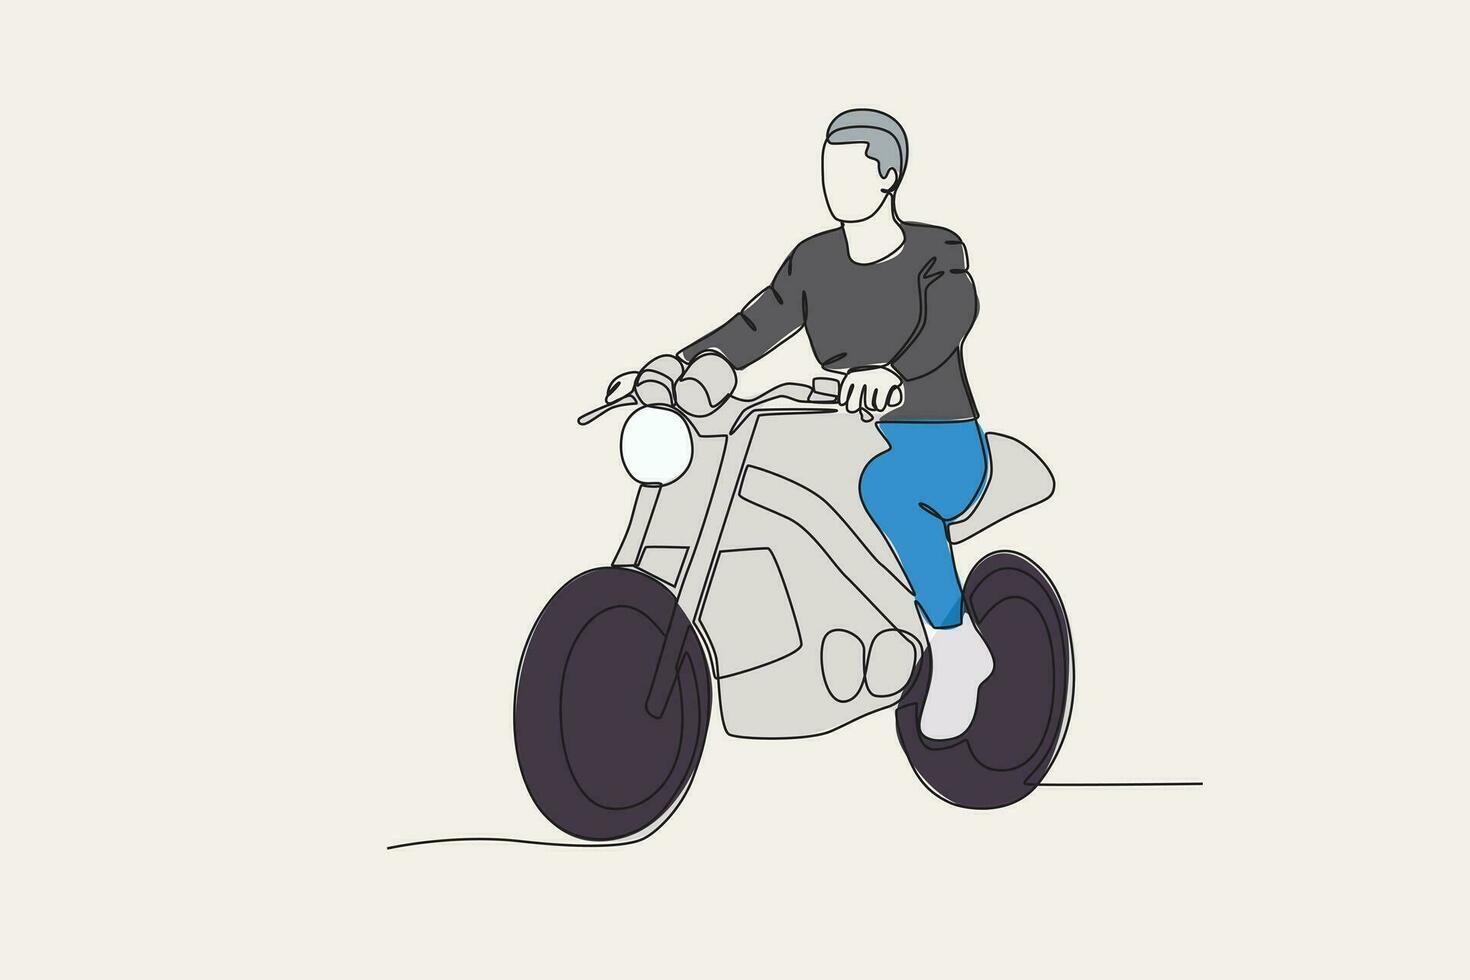 Color illustration of the front view of a man riding a motorcycle vector